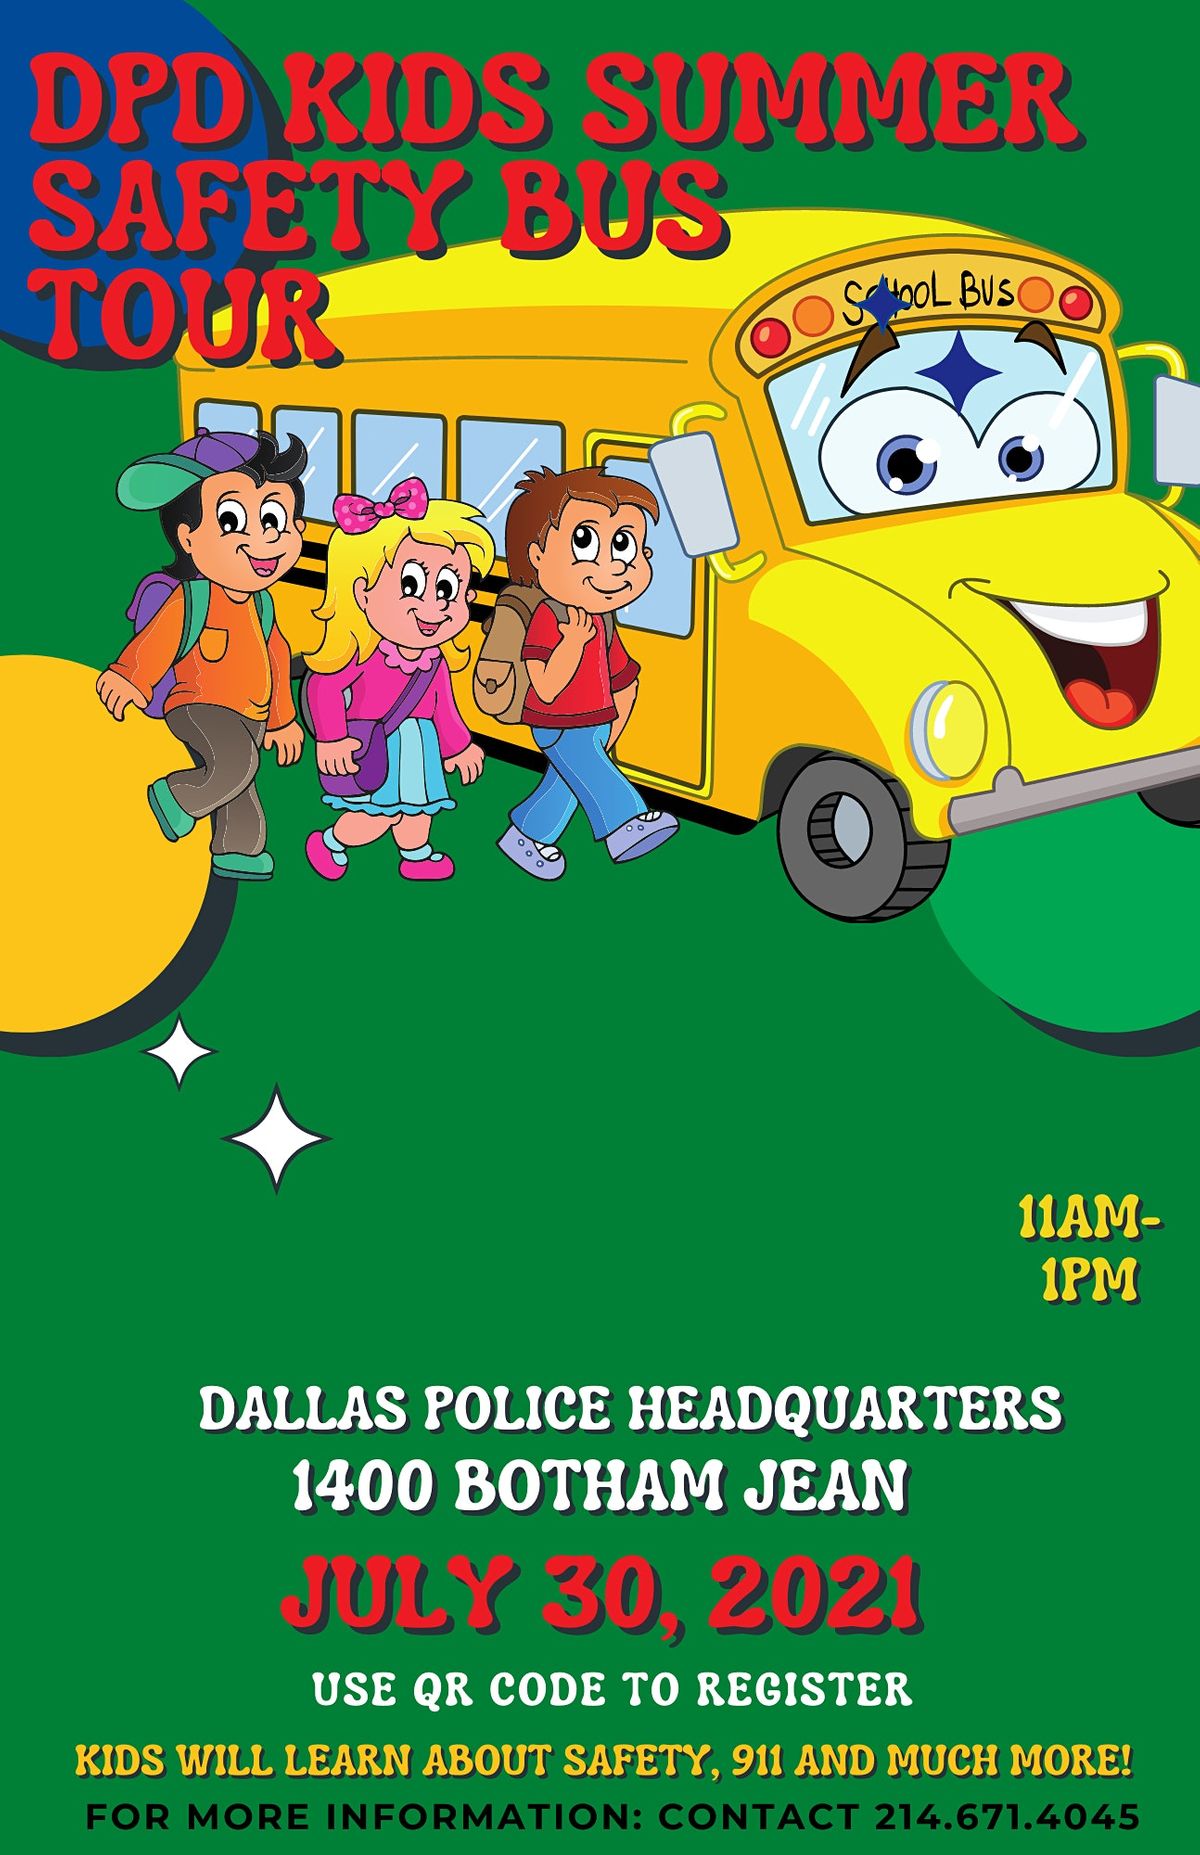 DPD KIDS SUMMER SAFETY BUS STOP TOUR